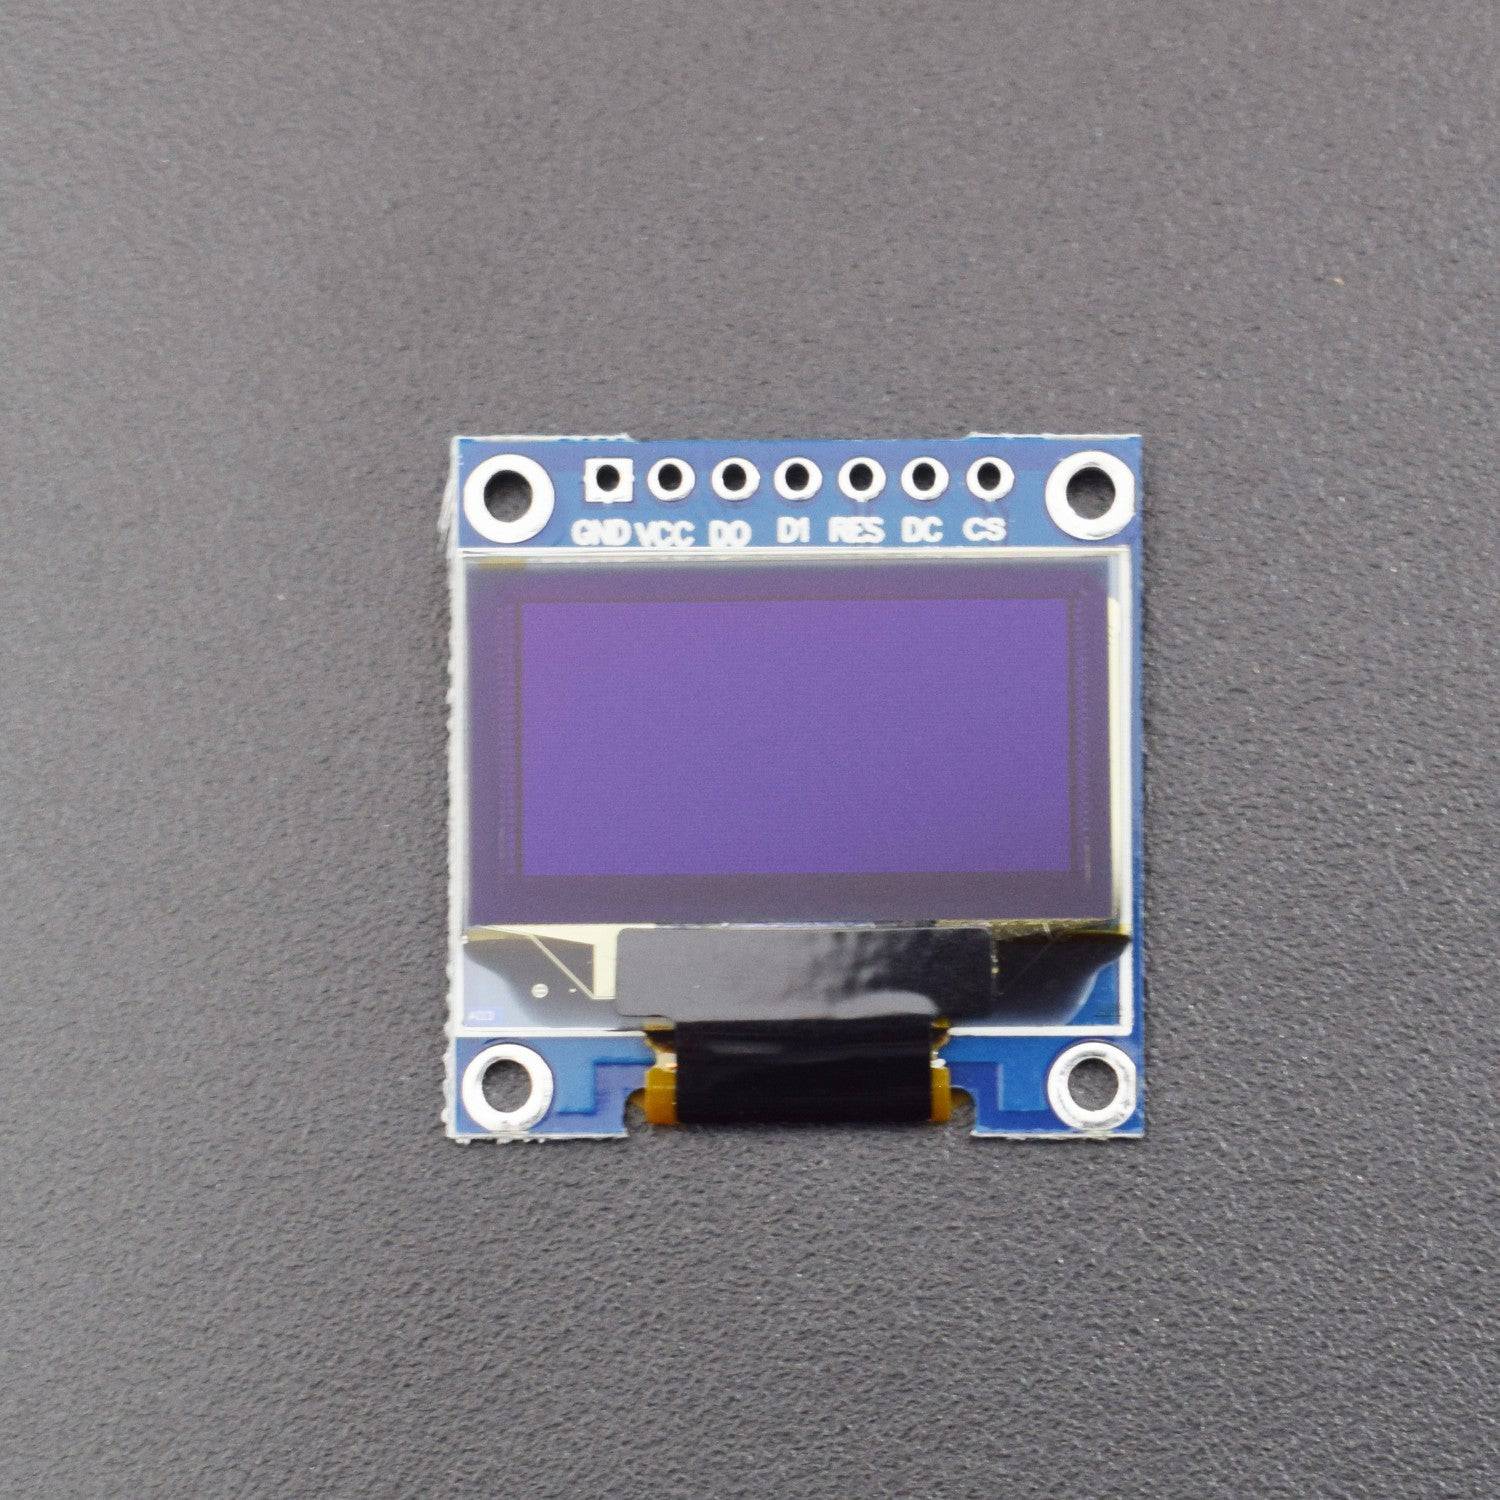 0.96" I2C IIC SPI Serial 128X64 Blue OLED LCD LED Display Module for Arduino-RS1189 - REES52